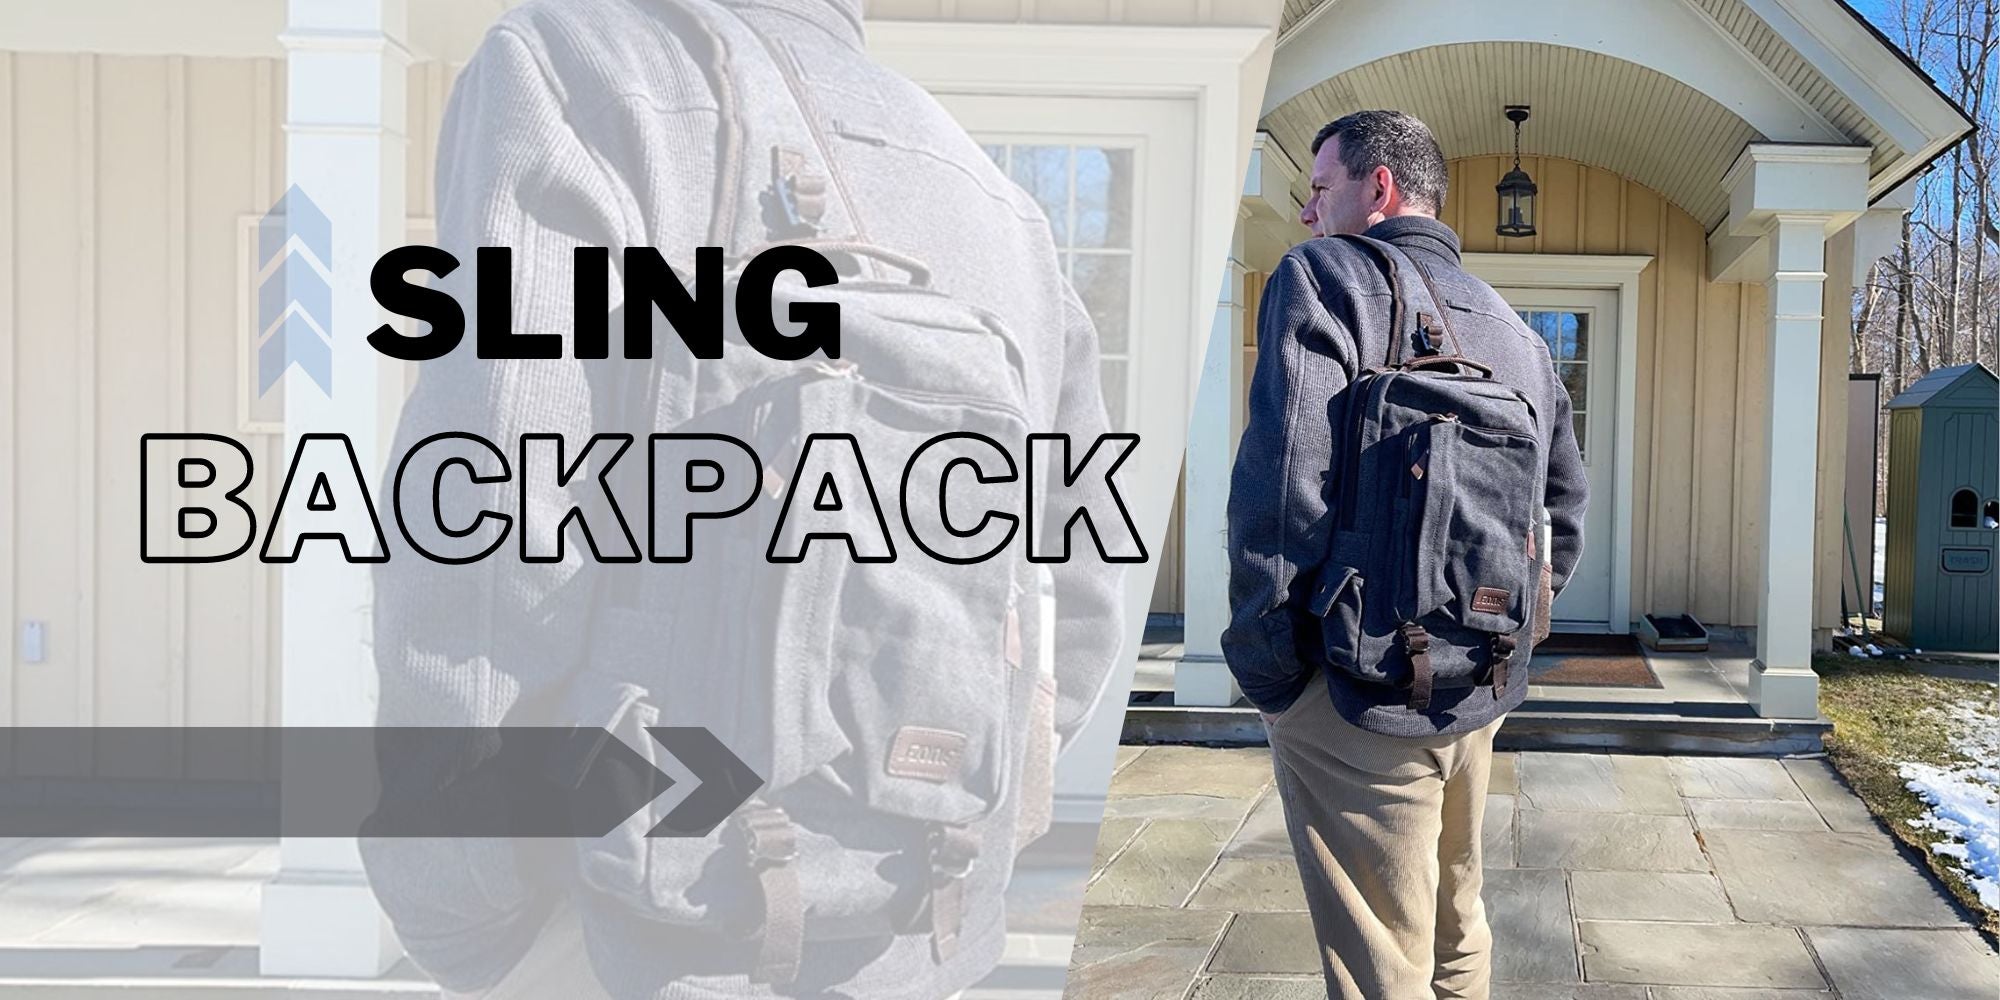 Weekly Review: Why do more and more people choose sling backpacks?